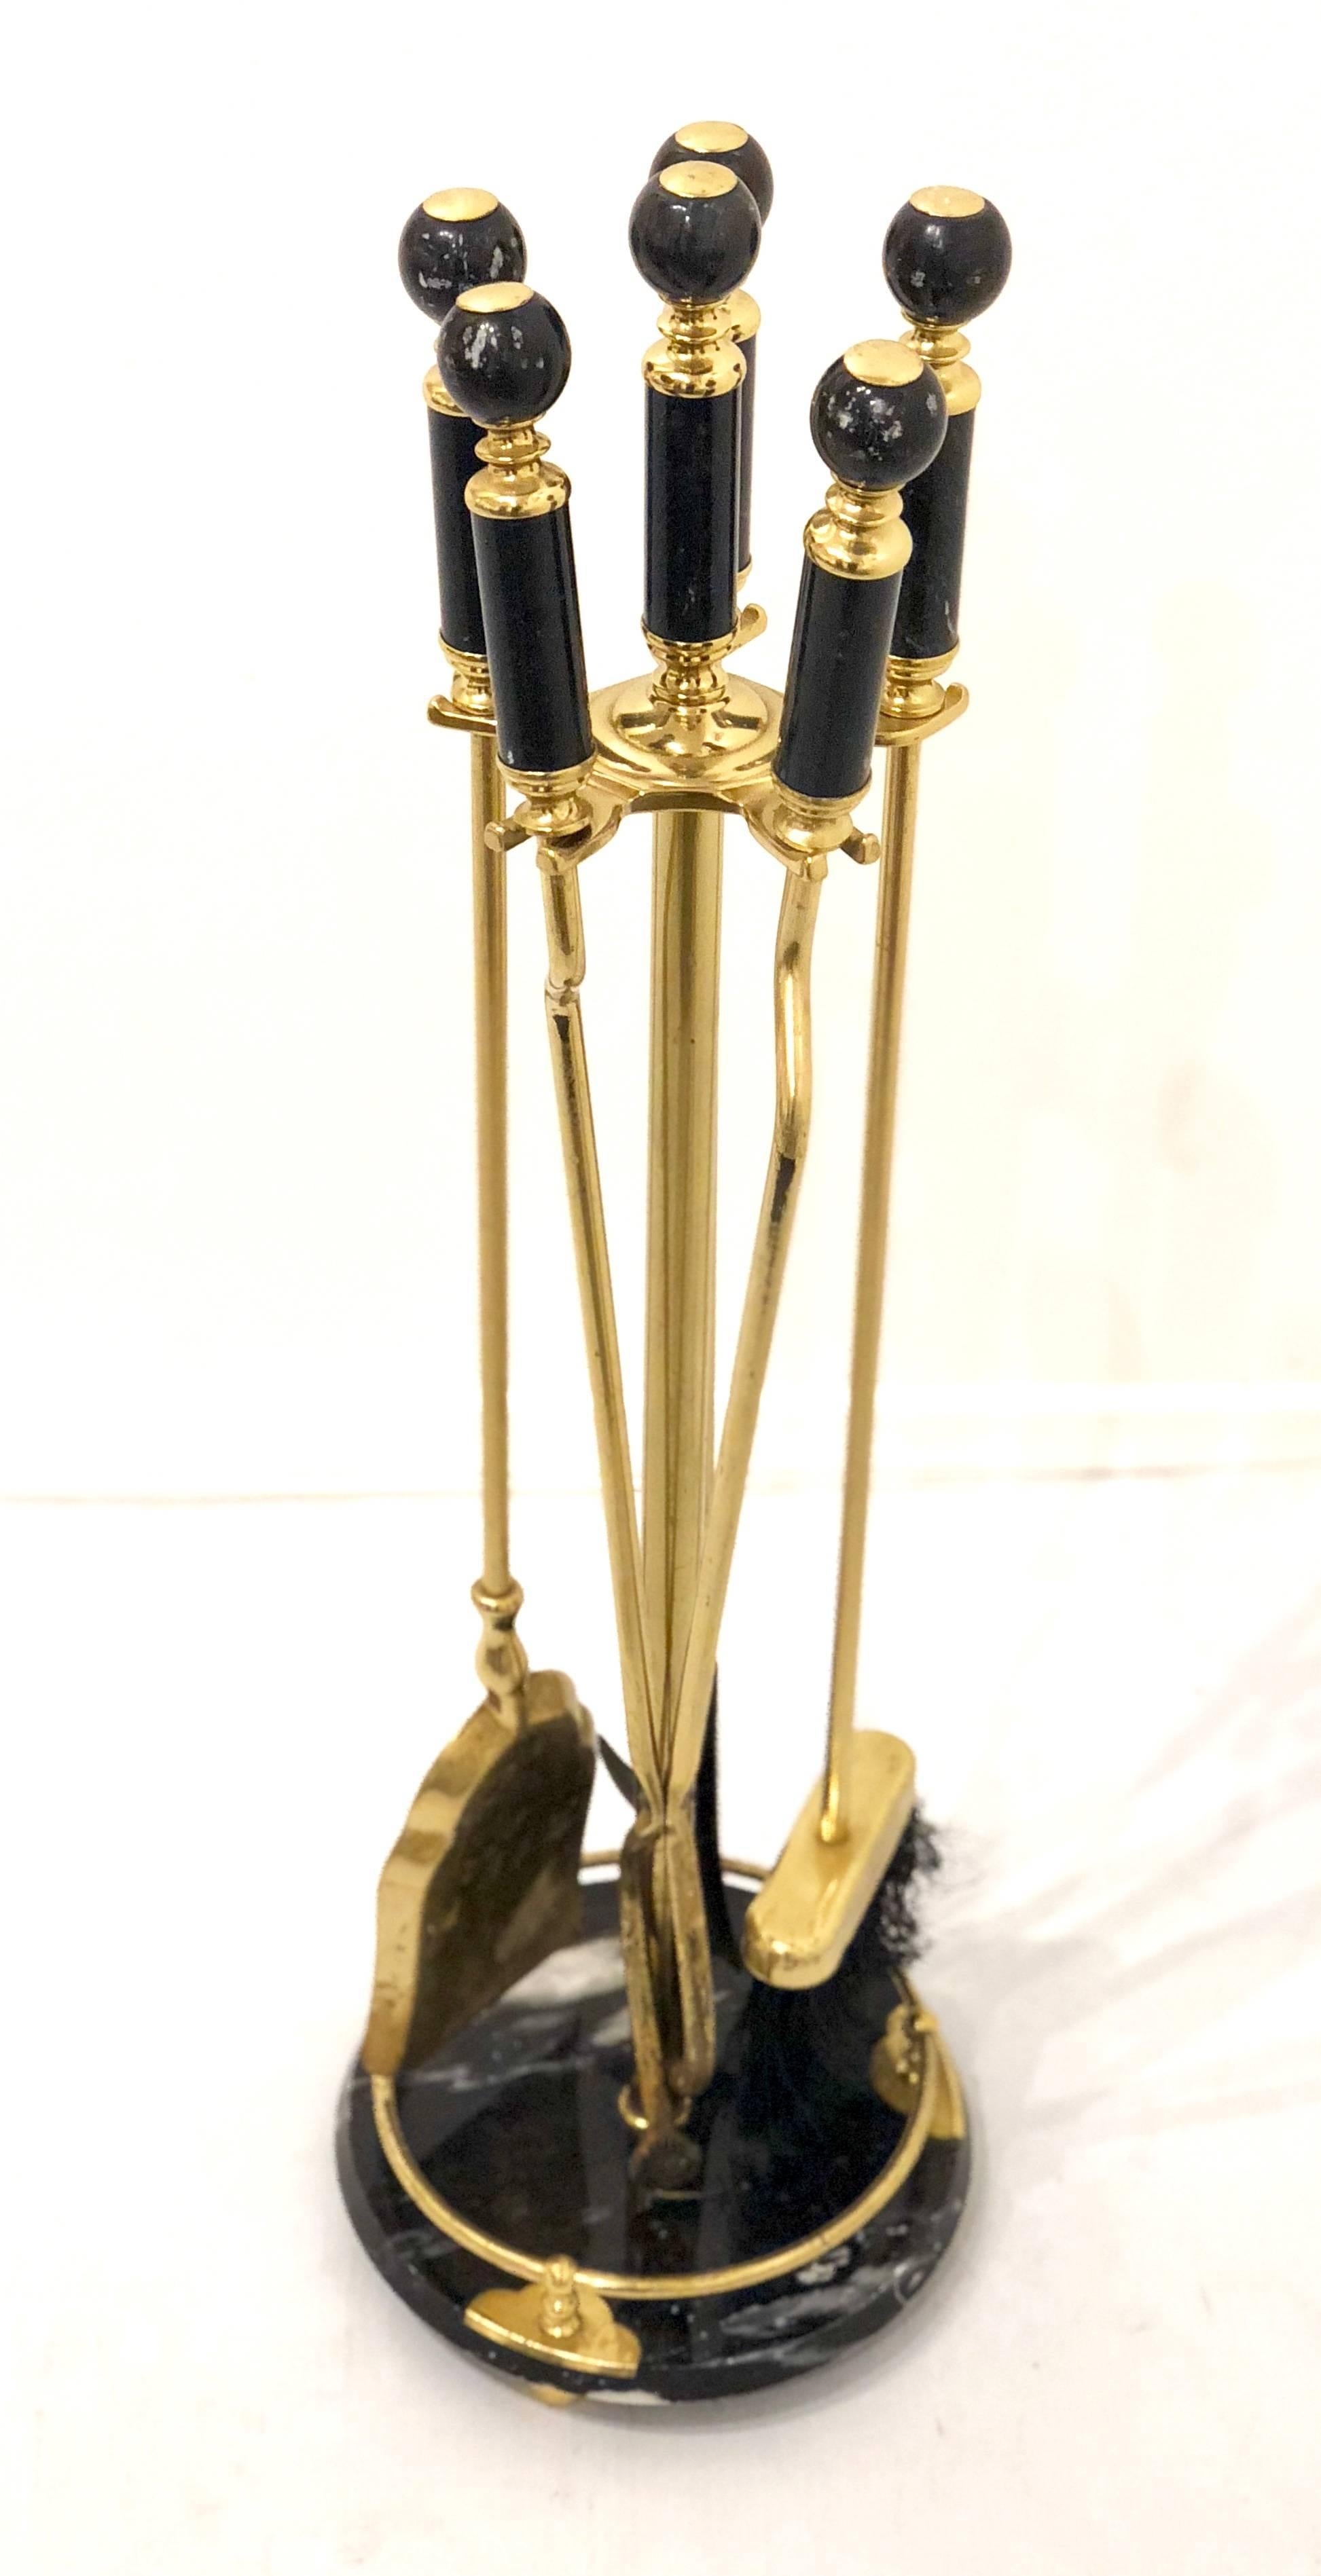 Elegant brass fireplace tool set with black marble base and handles, circa 1970s. Amazing quality; very heavy with nice detail on the handles. Set includes a shovel, brush, poker and log holder.